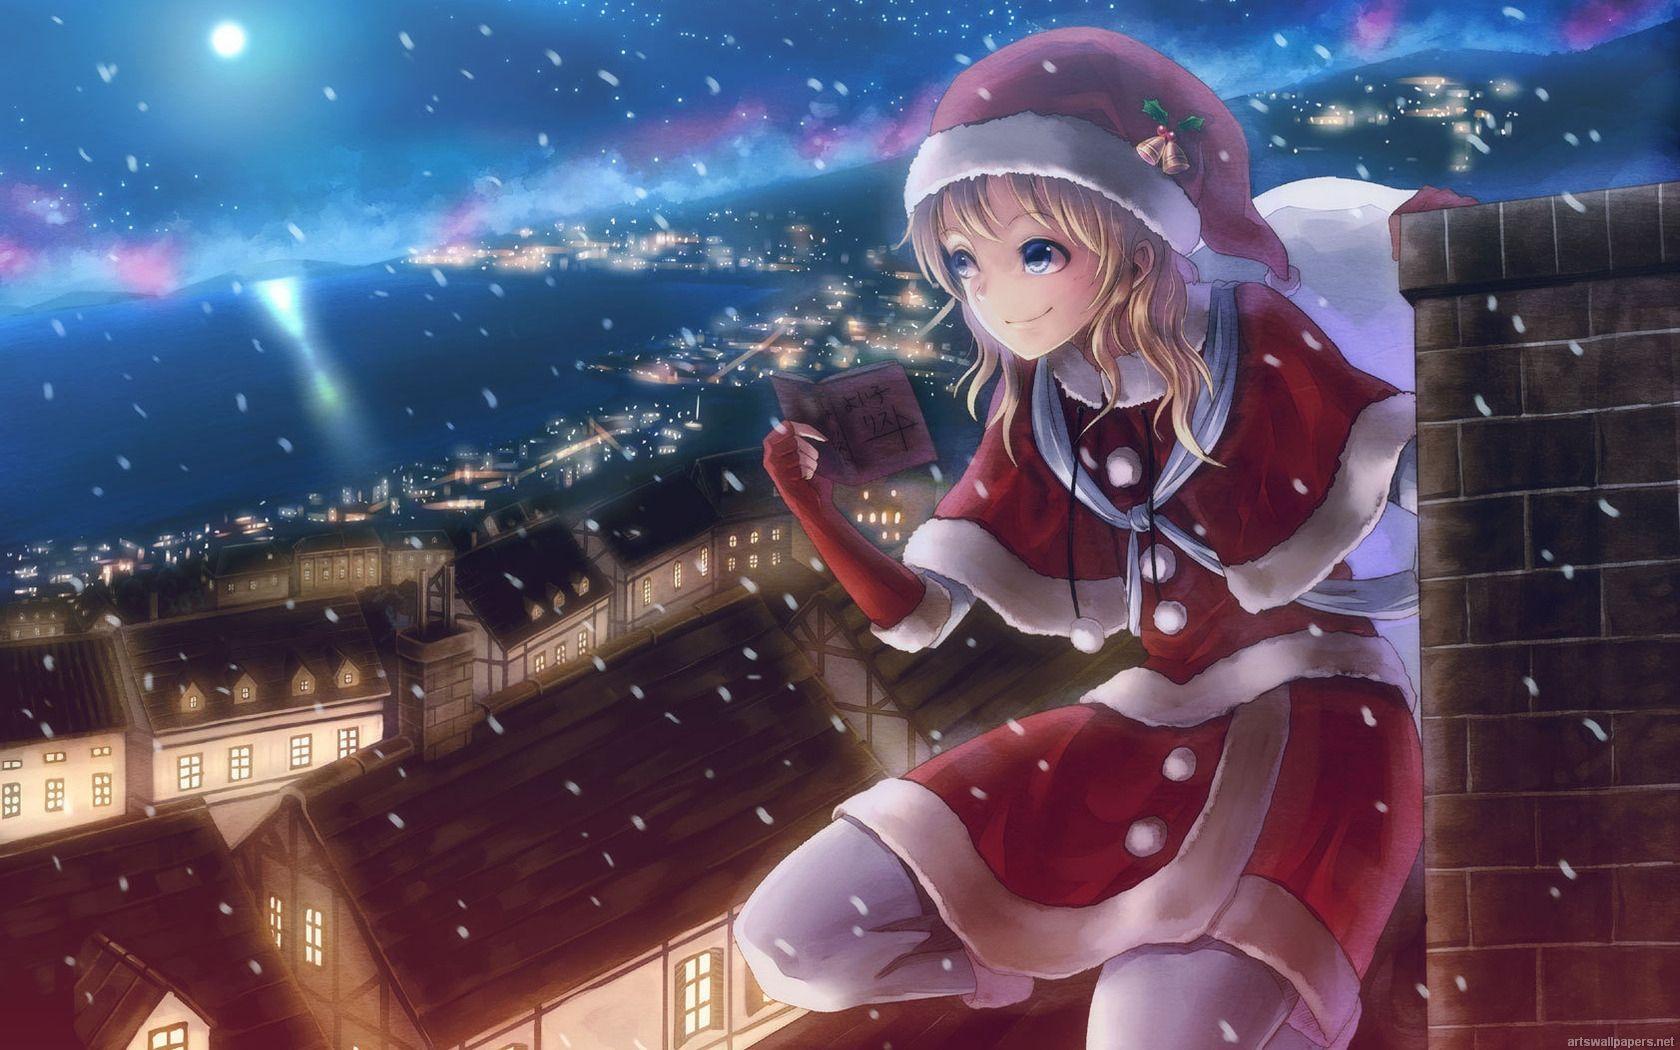 Who Made The Nice List: 10 Best Christmas Anime Characters